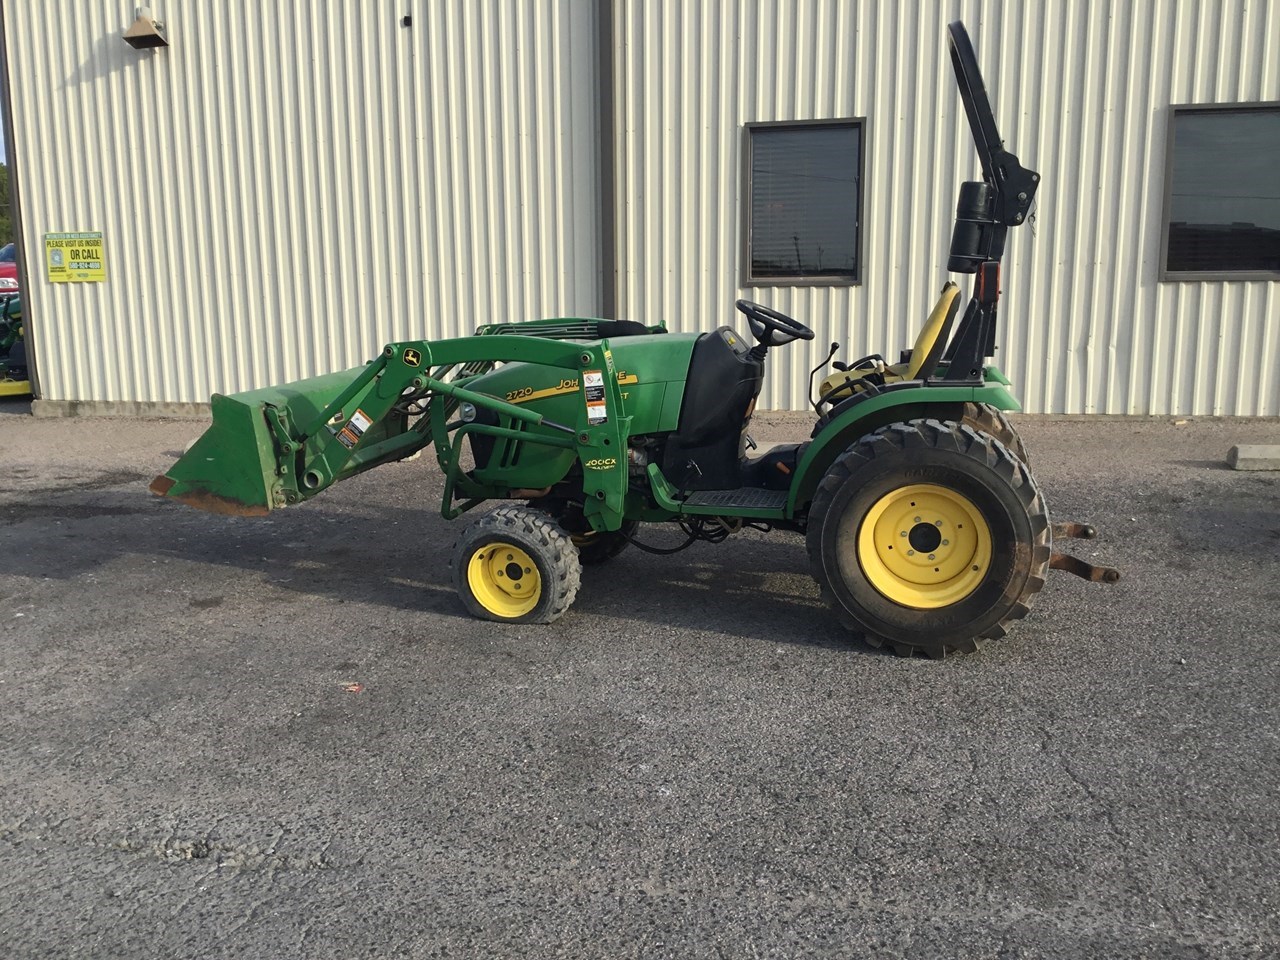 John Deere 2720 Cut Compact Utility Tractor For Sale In Durant Oklahoma 9660